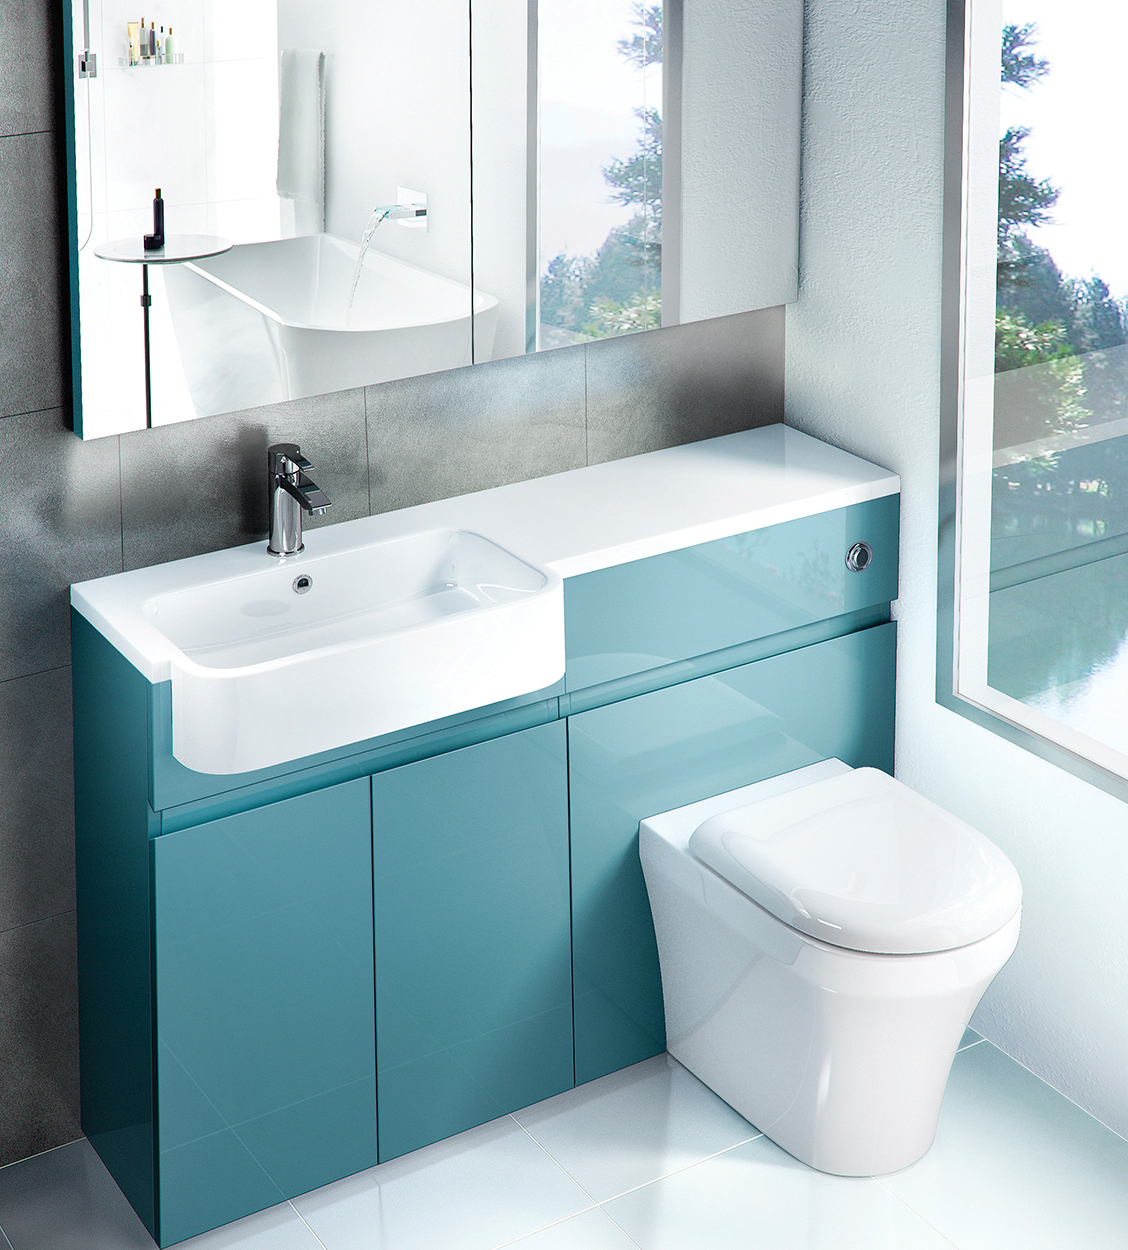 Aqua Cabinets D300 1200mm Fitted Furniture Pack Uk Bathroom with size 1128 X 1250